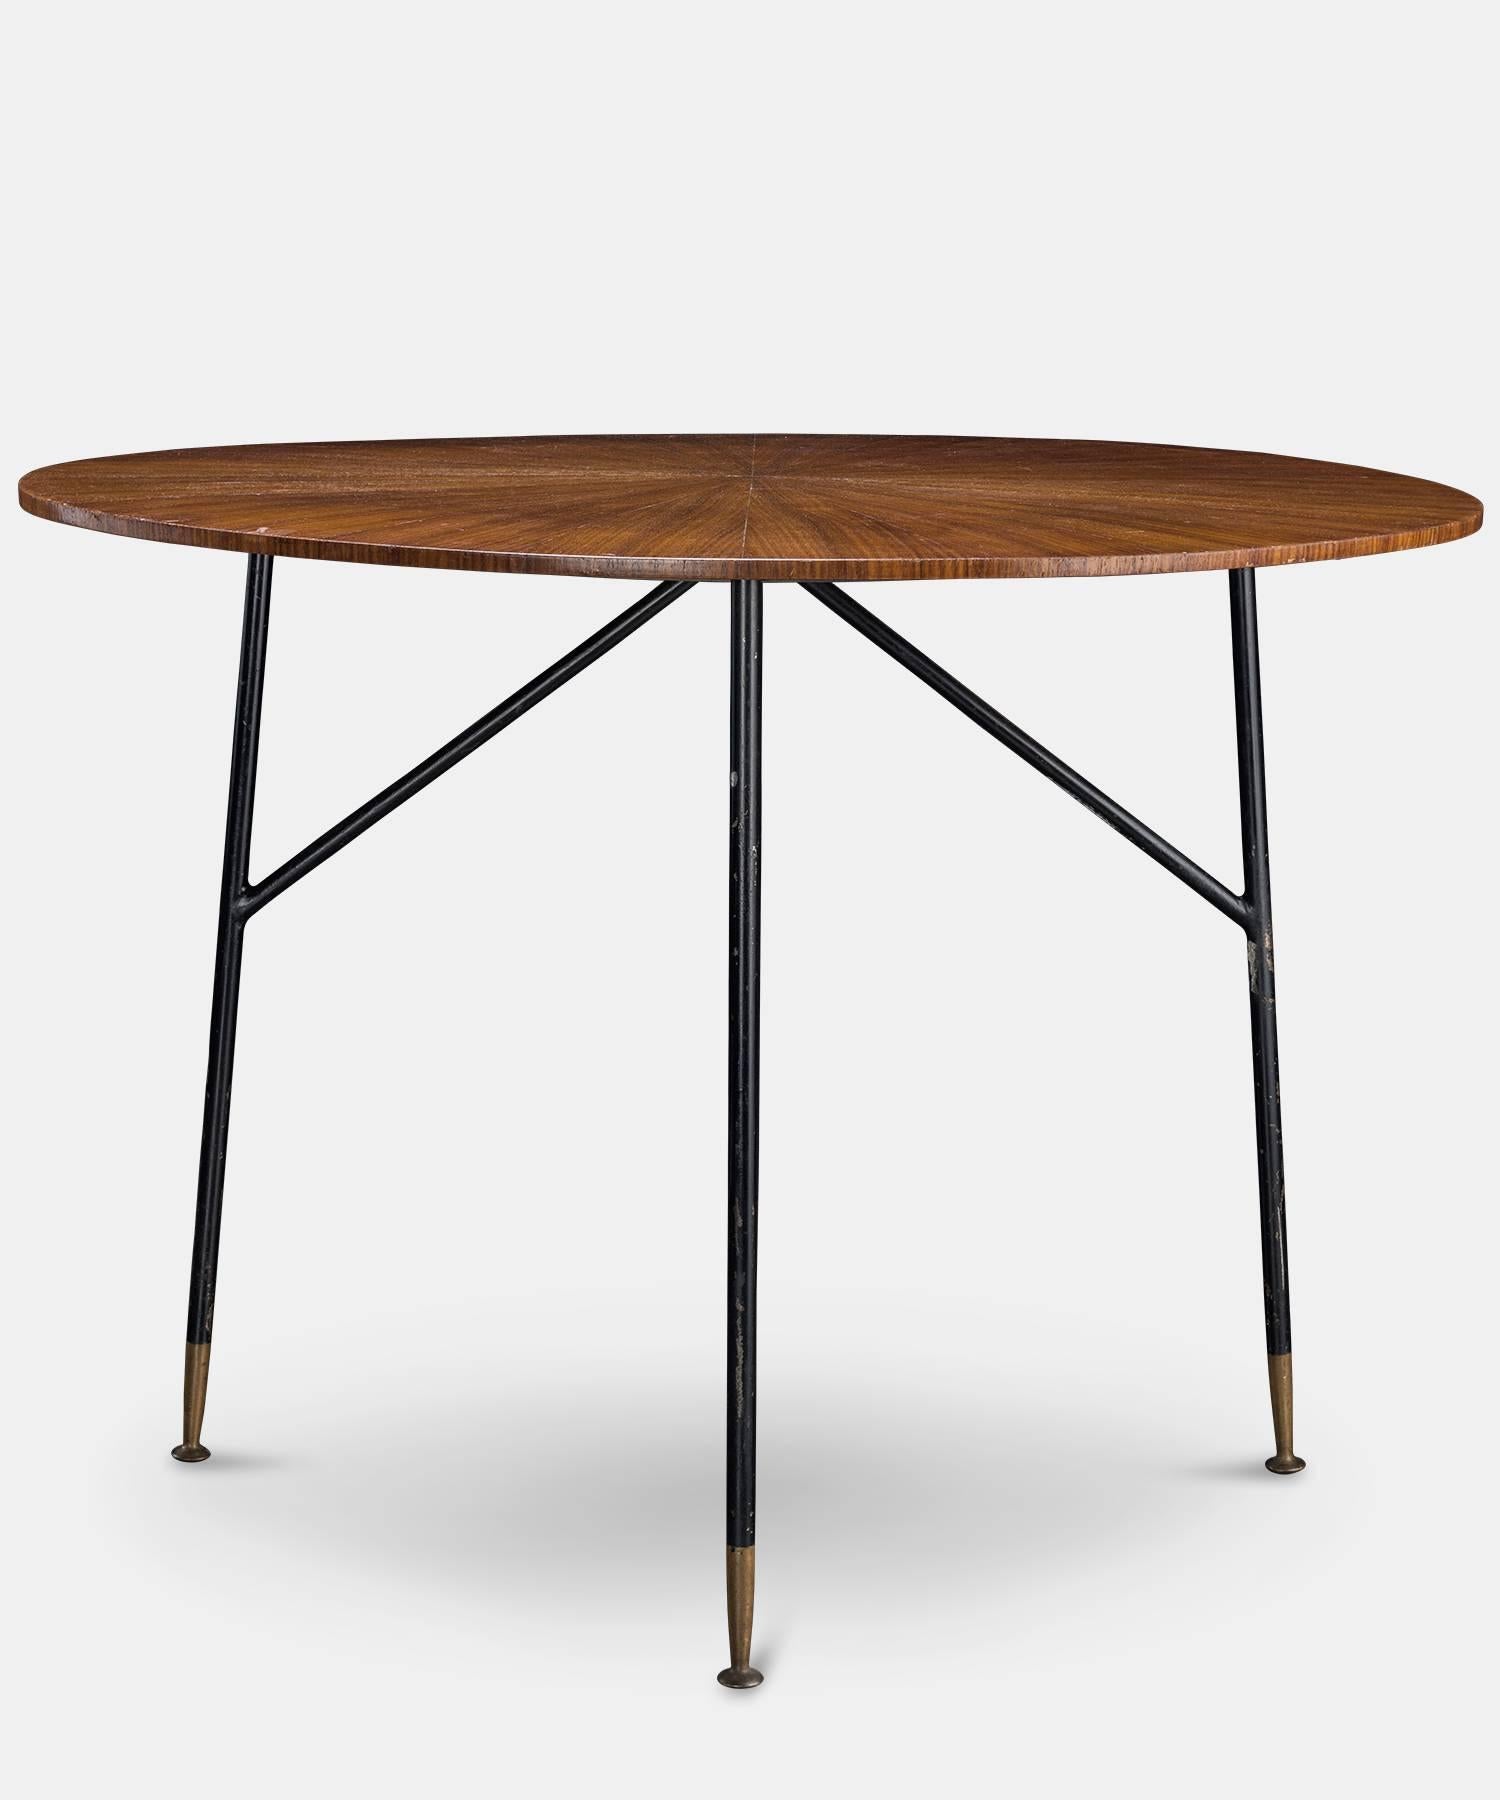 Sunburst wood and metal centre table, France, circa 1960.

Exquisite top on tall, modern metal legs. 